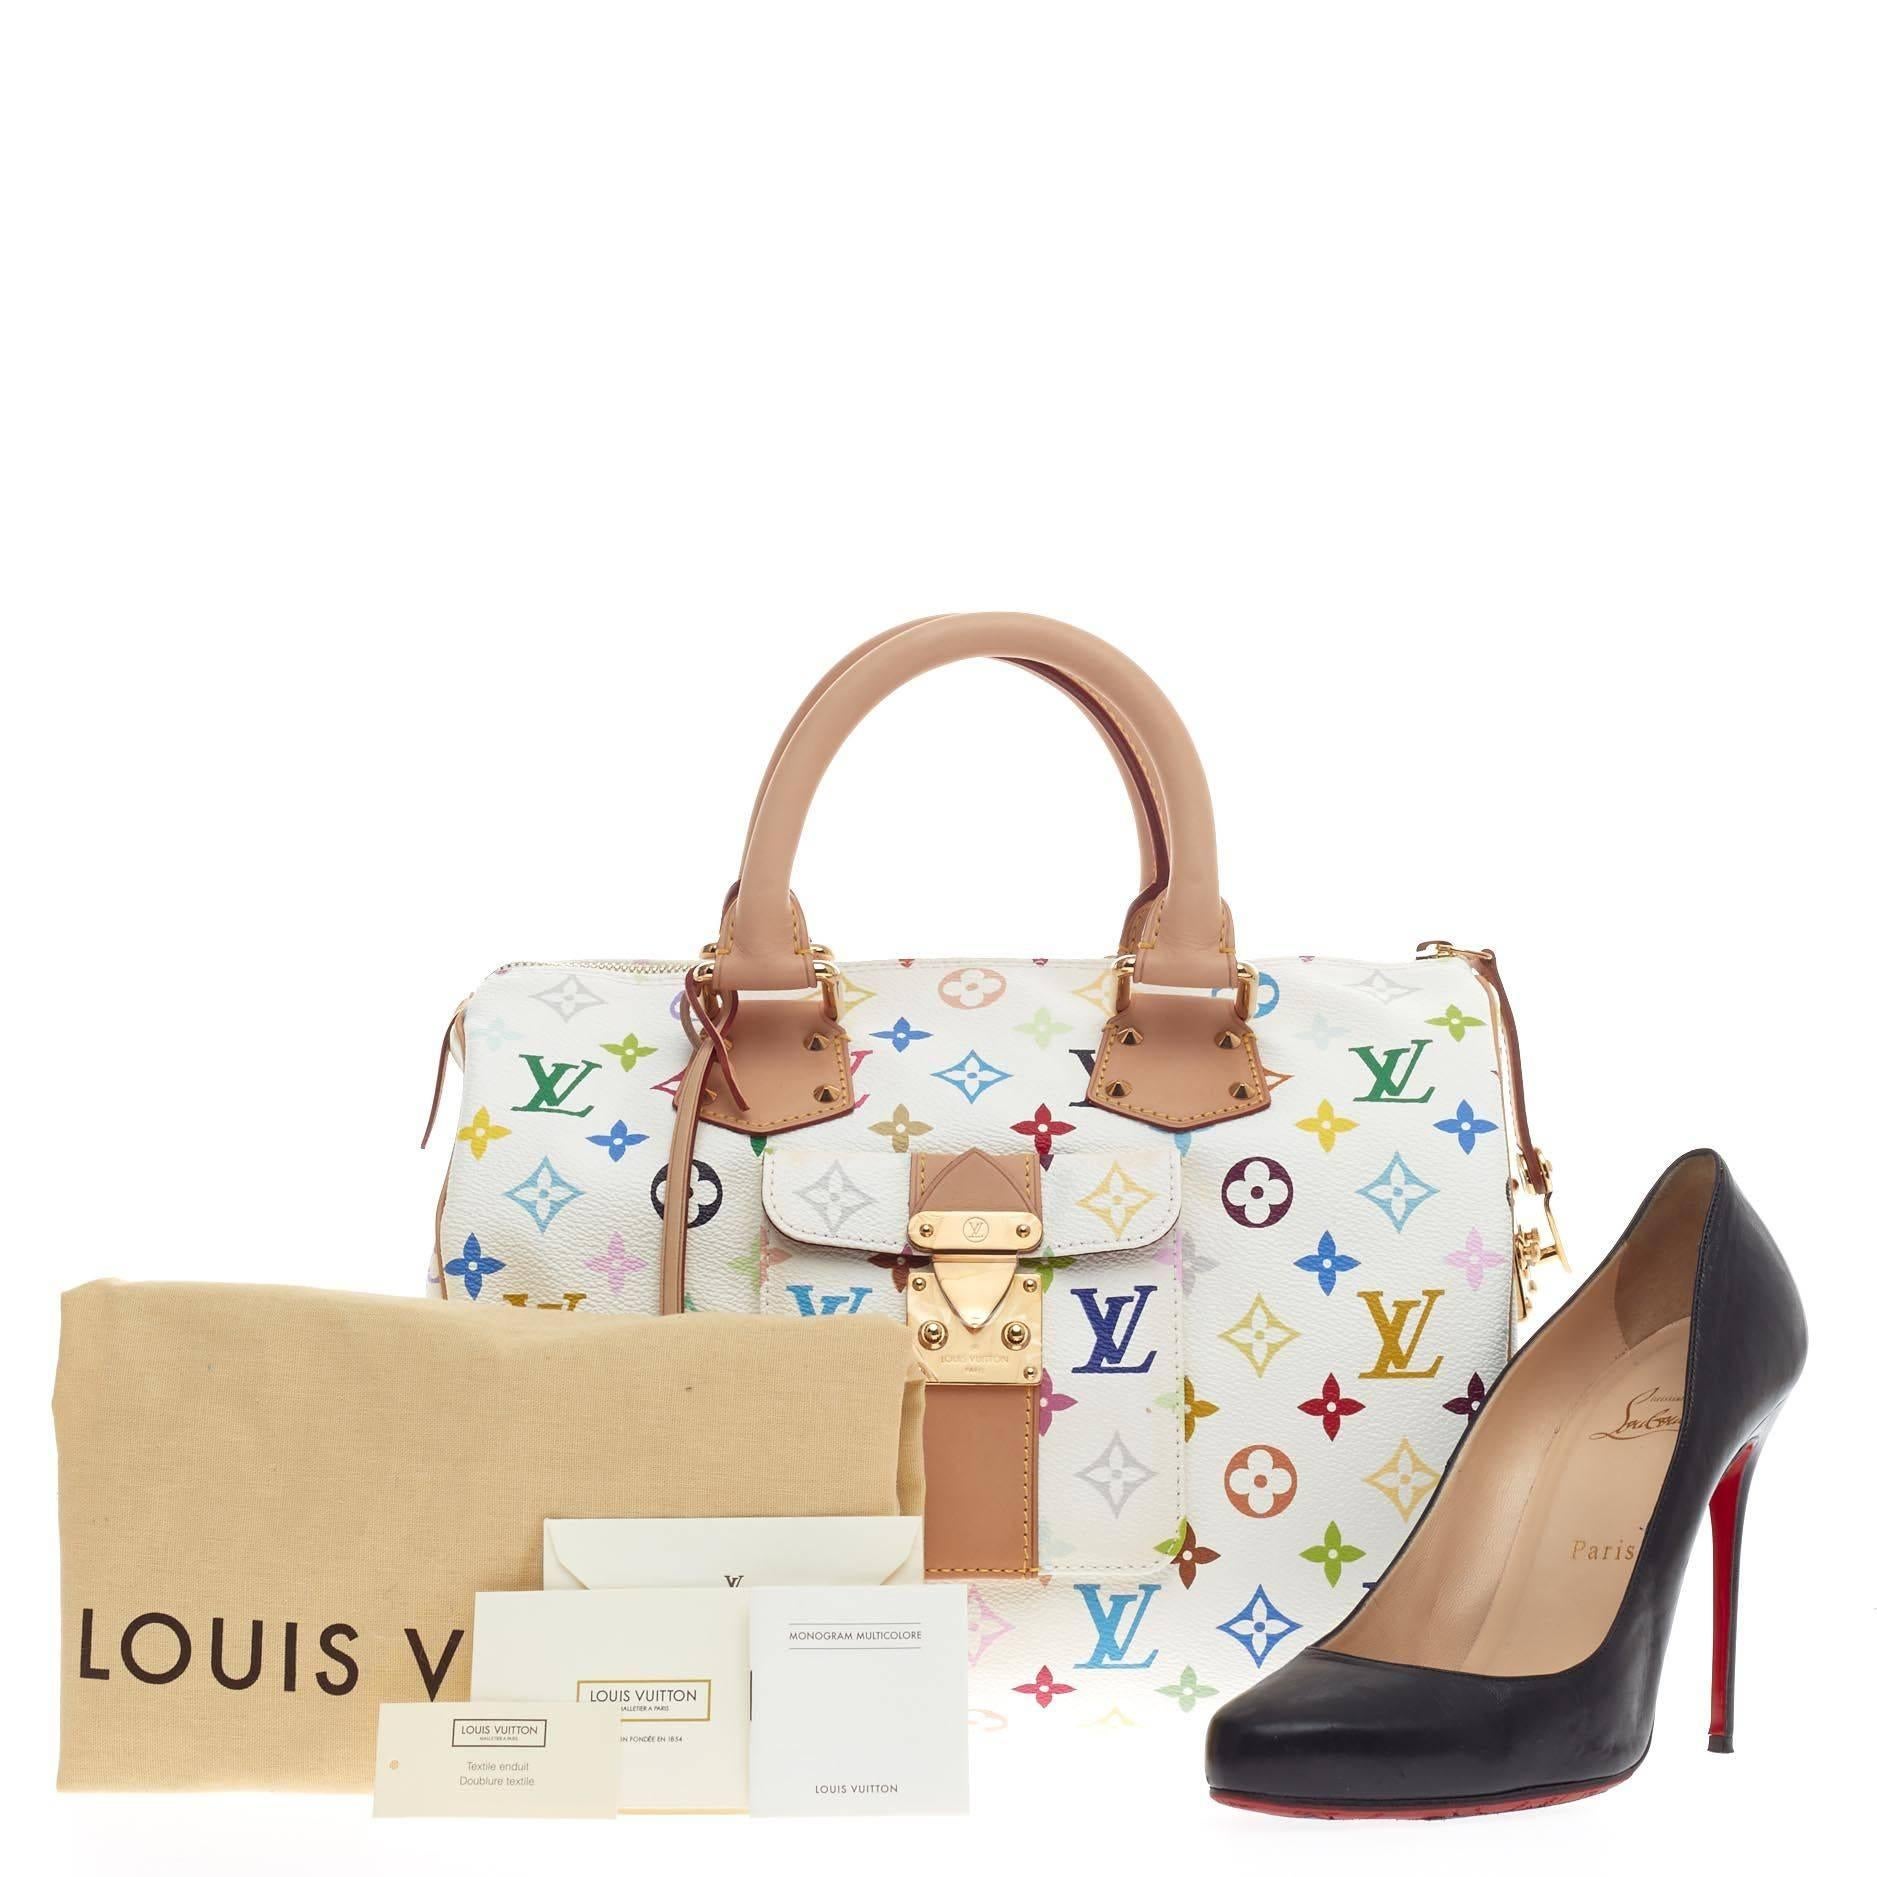 This authentic Louis Vuitton Speedy Monogram Multicolor 30 is vibrant and elegant, made for a sophisticated traveling fashionista. Crafted with Louis Vuitton’s signature white monogram multicolor coated canvas, this iconic bag features a front flap